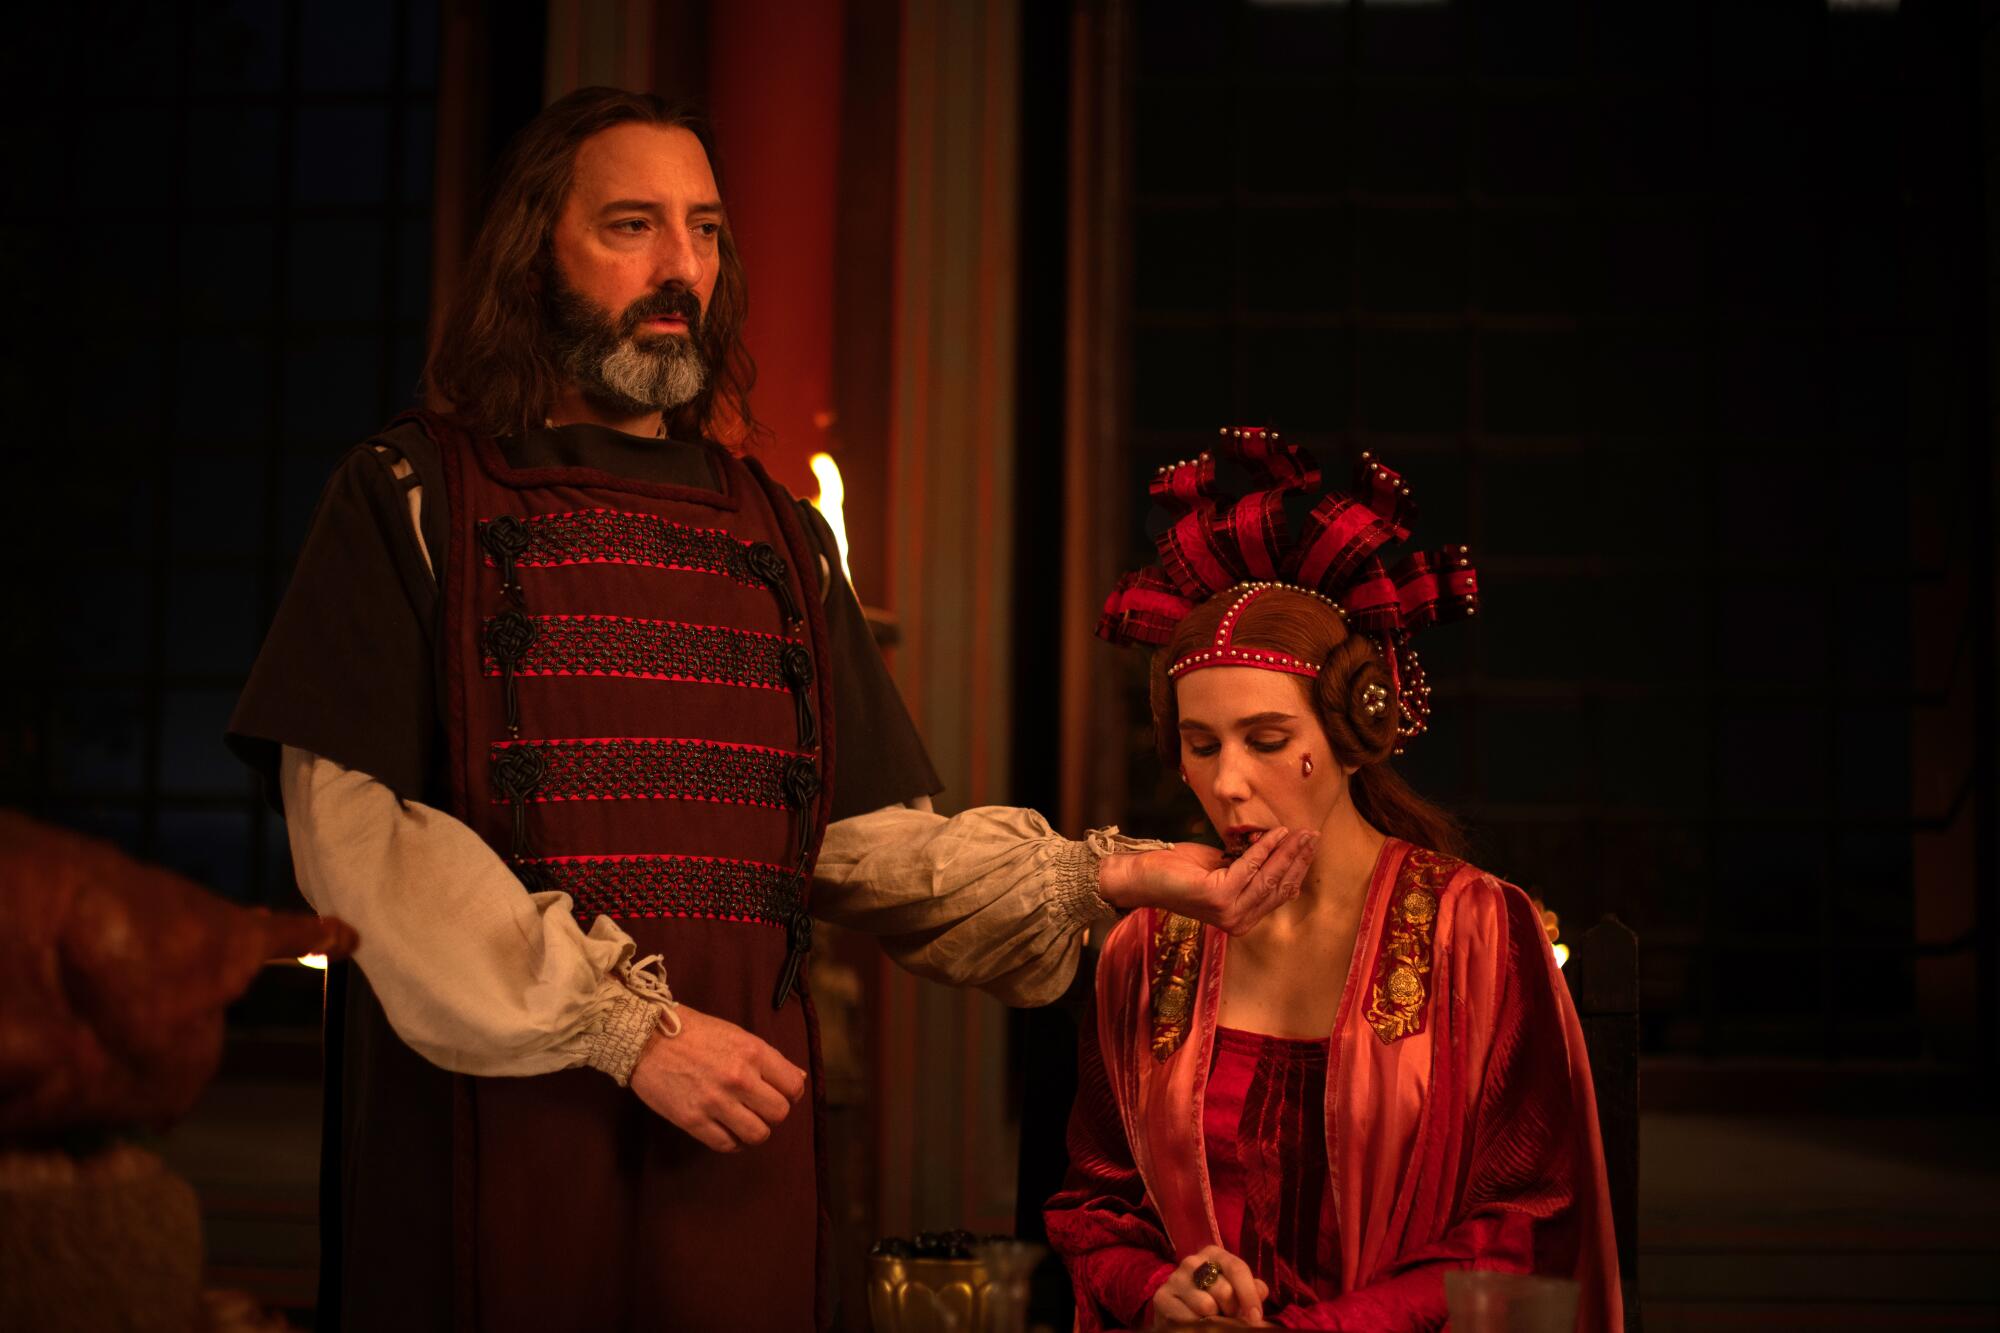 Tony Hale as Sirisco and Zosia Mamet as Pampinea in Netflix's "The Decameron."